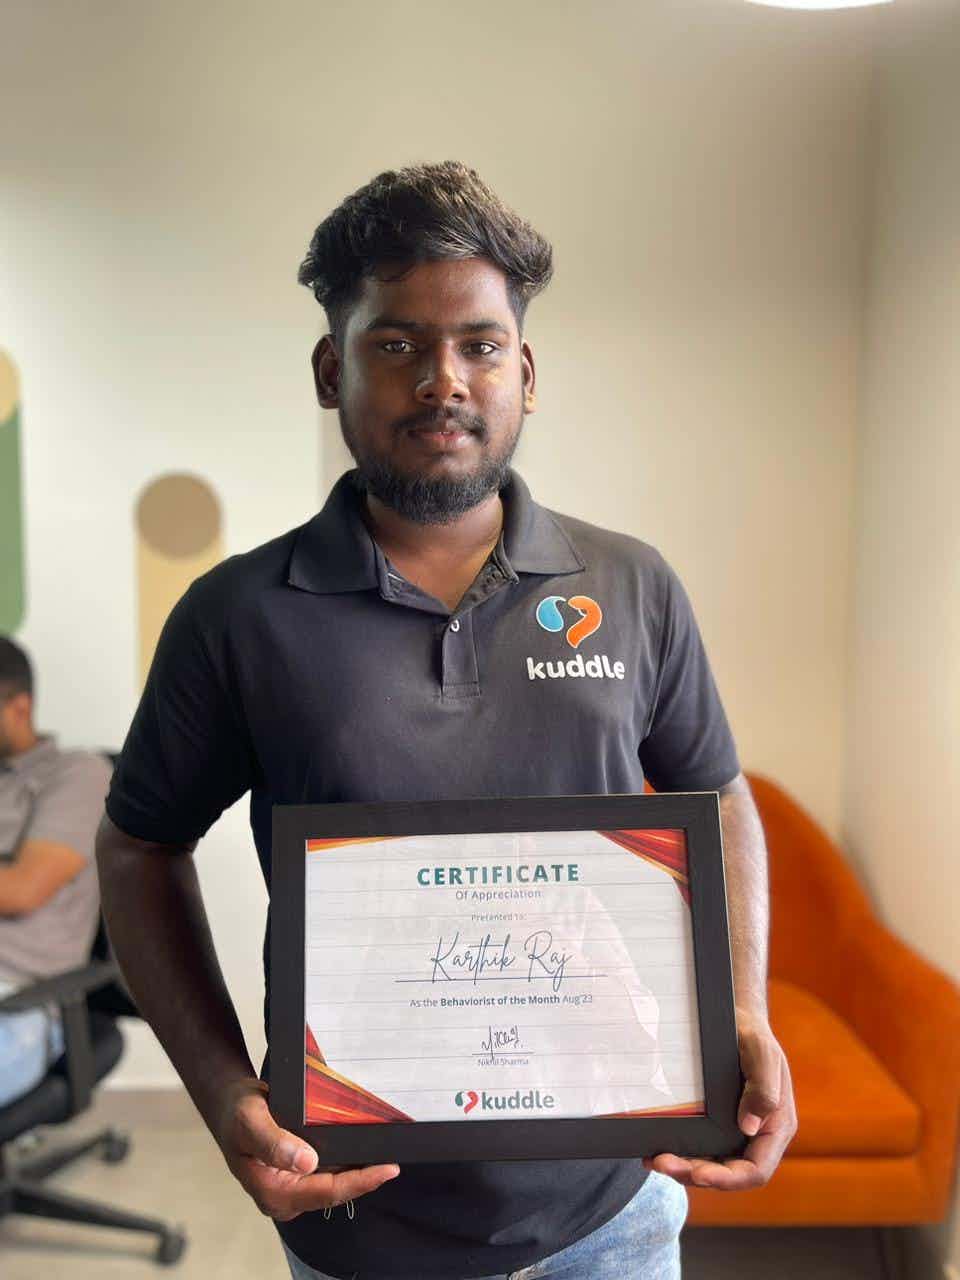 🐾 Behaviourist of the Month 🐾

Let's take a moment to celebrate our Outstanding Behaviourist of the month, Karthik Raj, whose dedication and skills have made a profound impact on our furry clients.

Join us in applauding his efforts and dedication towards facilitating stronger bonds between pets and their parents 💖👏